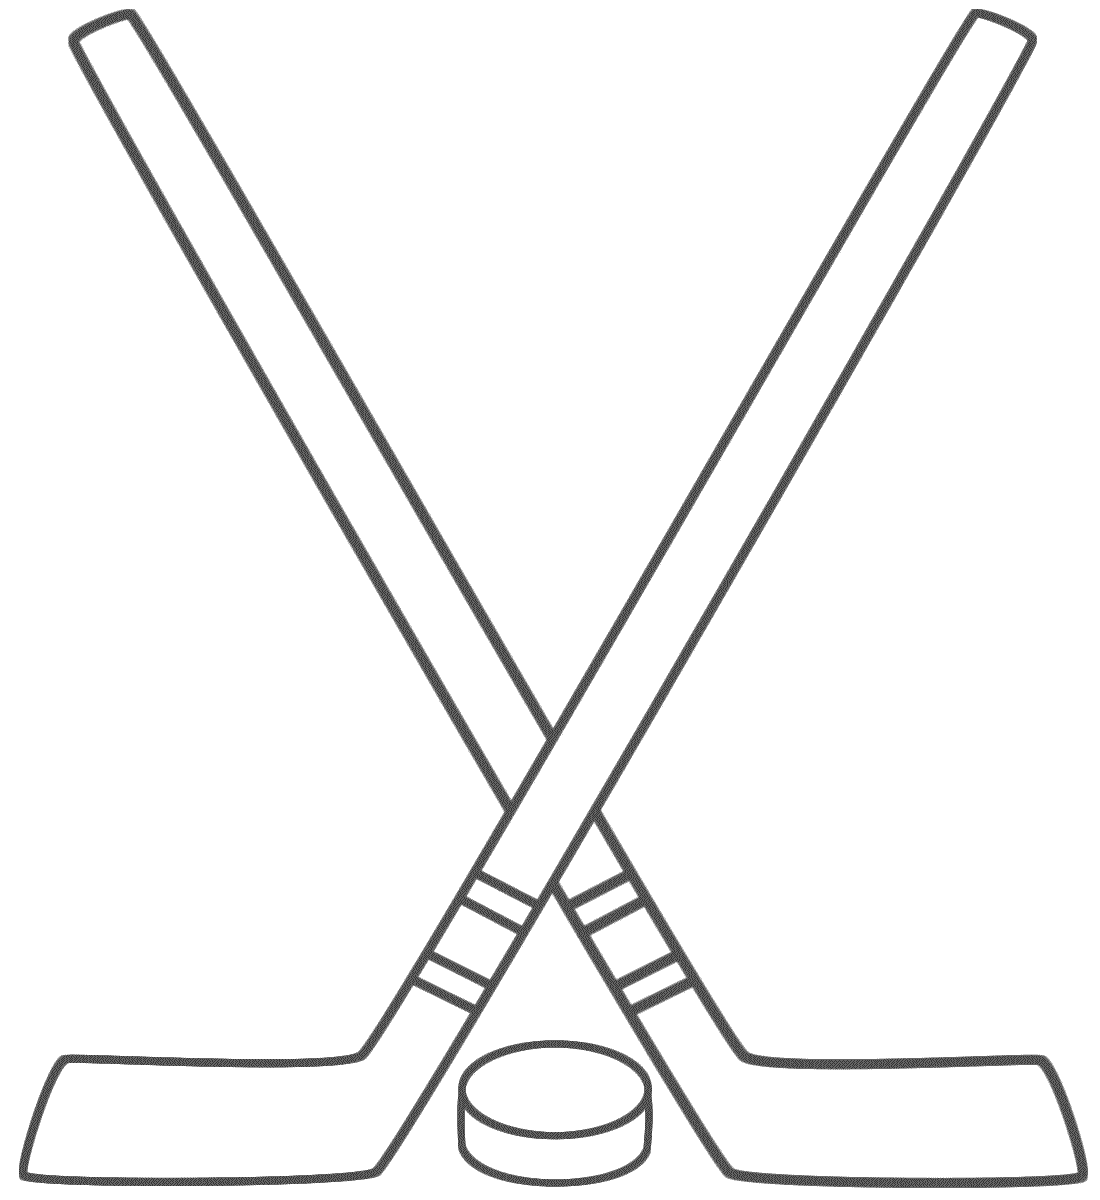 Hockey Sticks With A Puck   Coloring Page  Sports